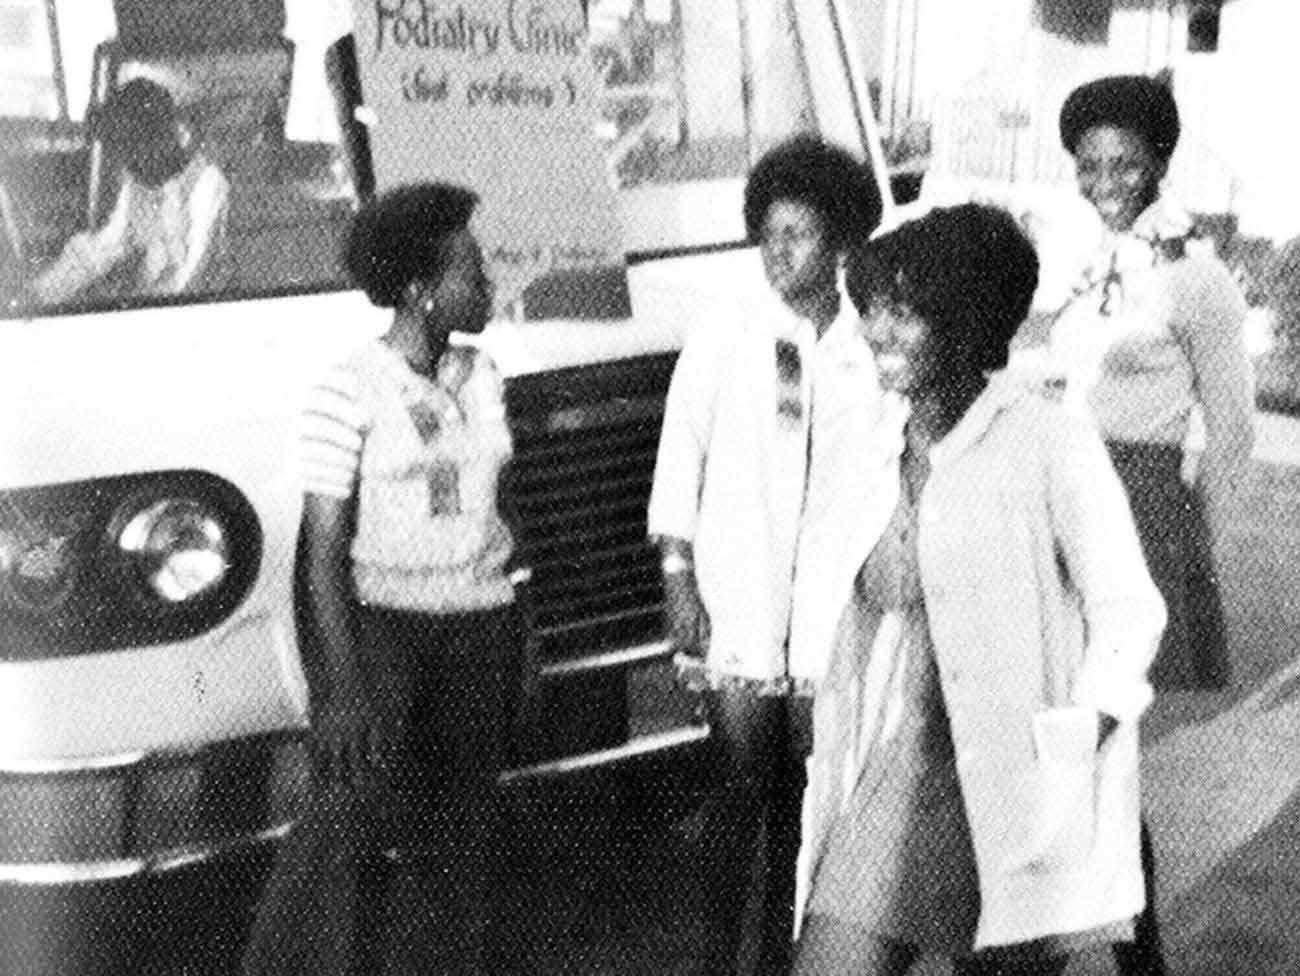 4 young 70s era women nursing students standing in front of a large mobile health van with a sign that reads "podiatry clinic"